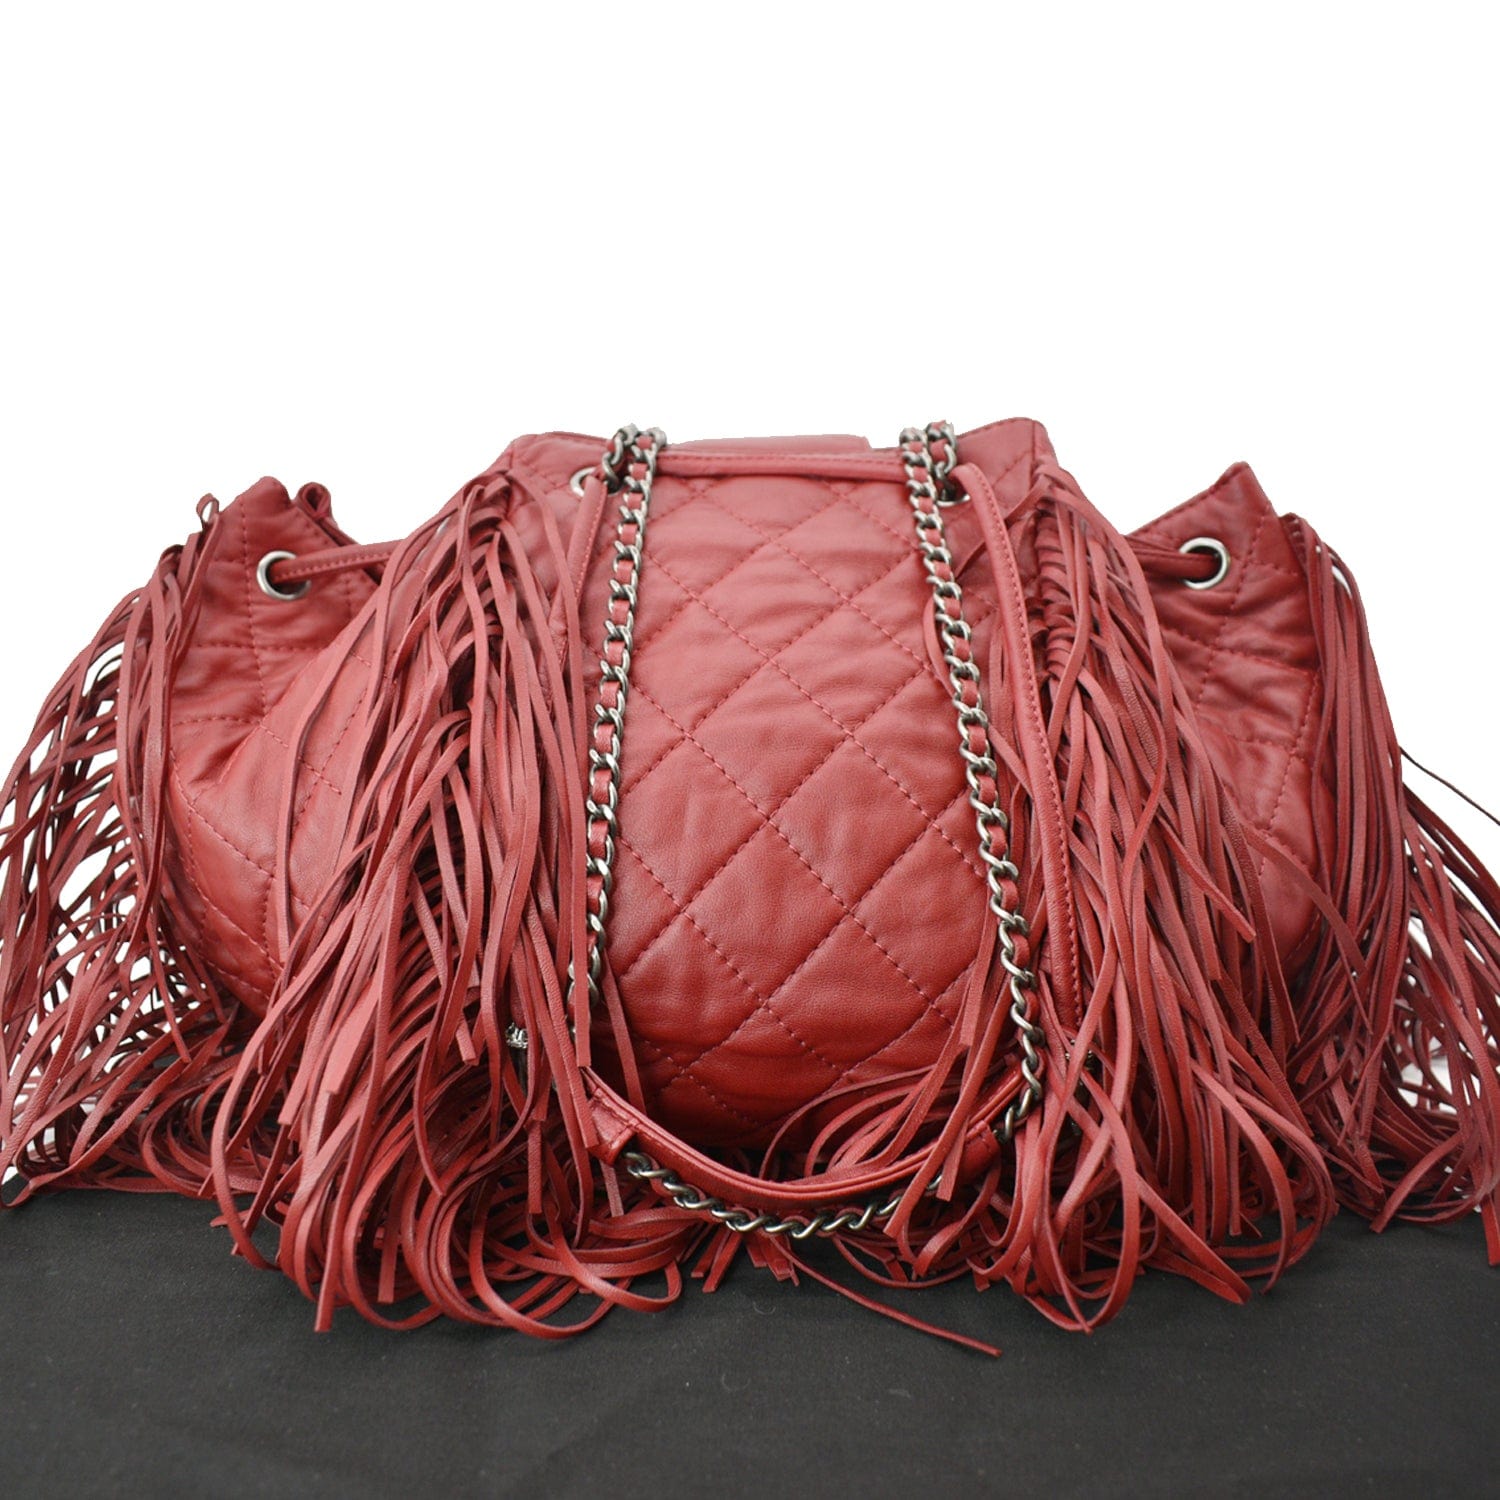 Chanel women's burgundy Pony hair and leather fringe Paris-Dallas